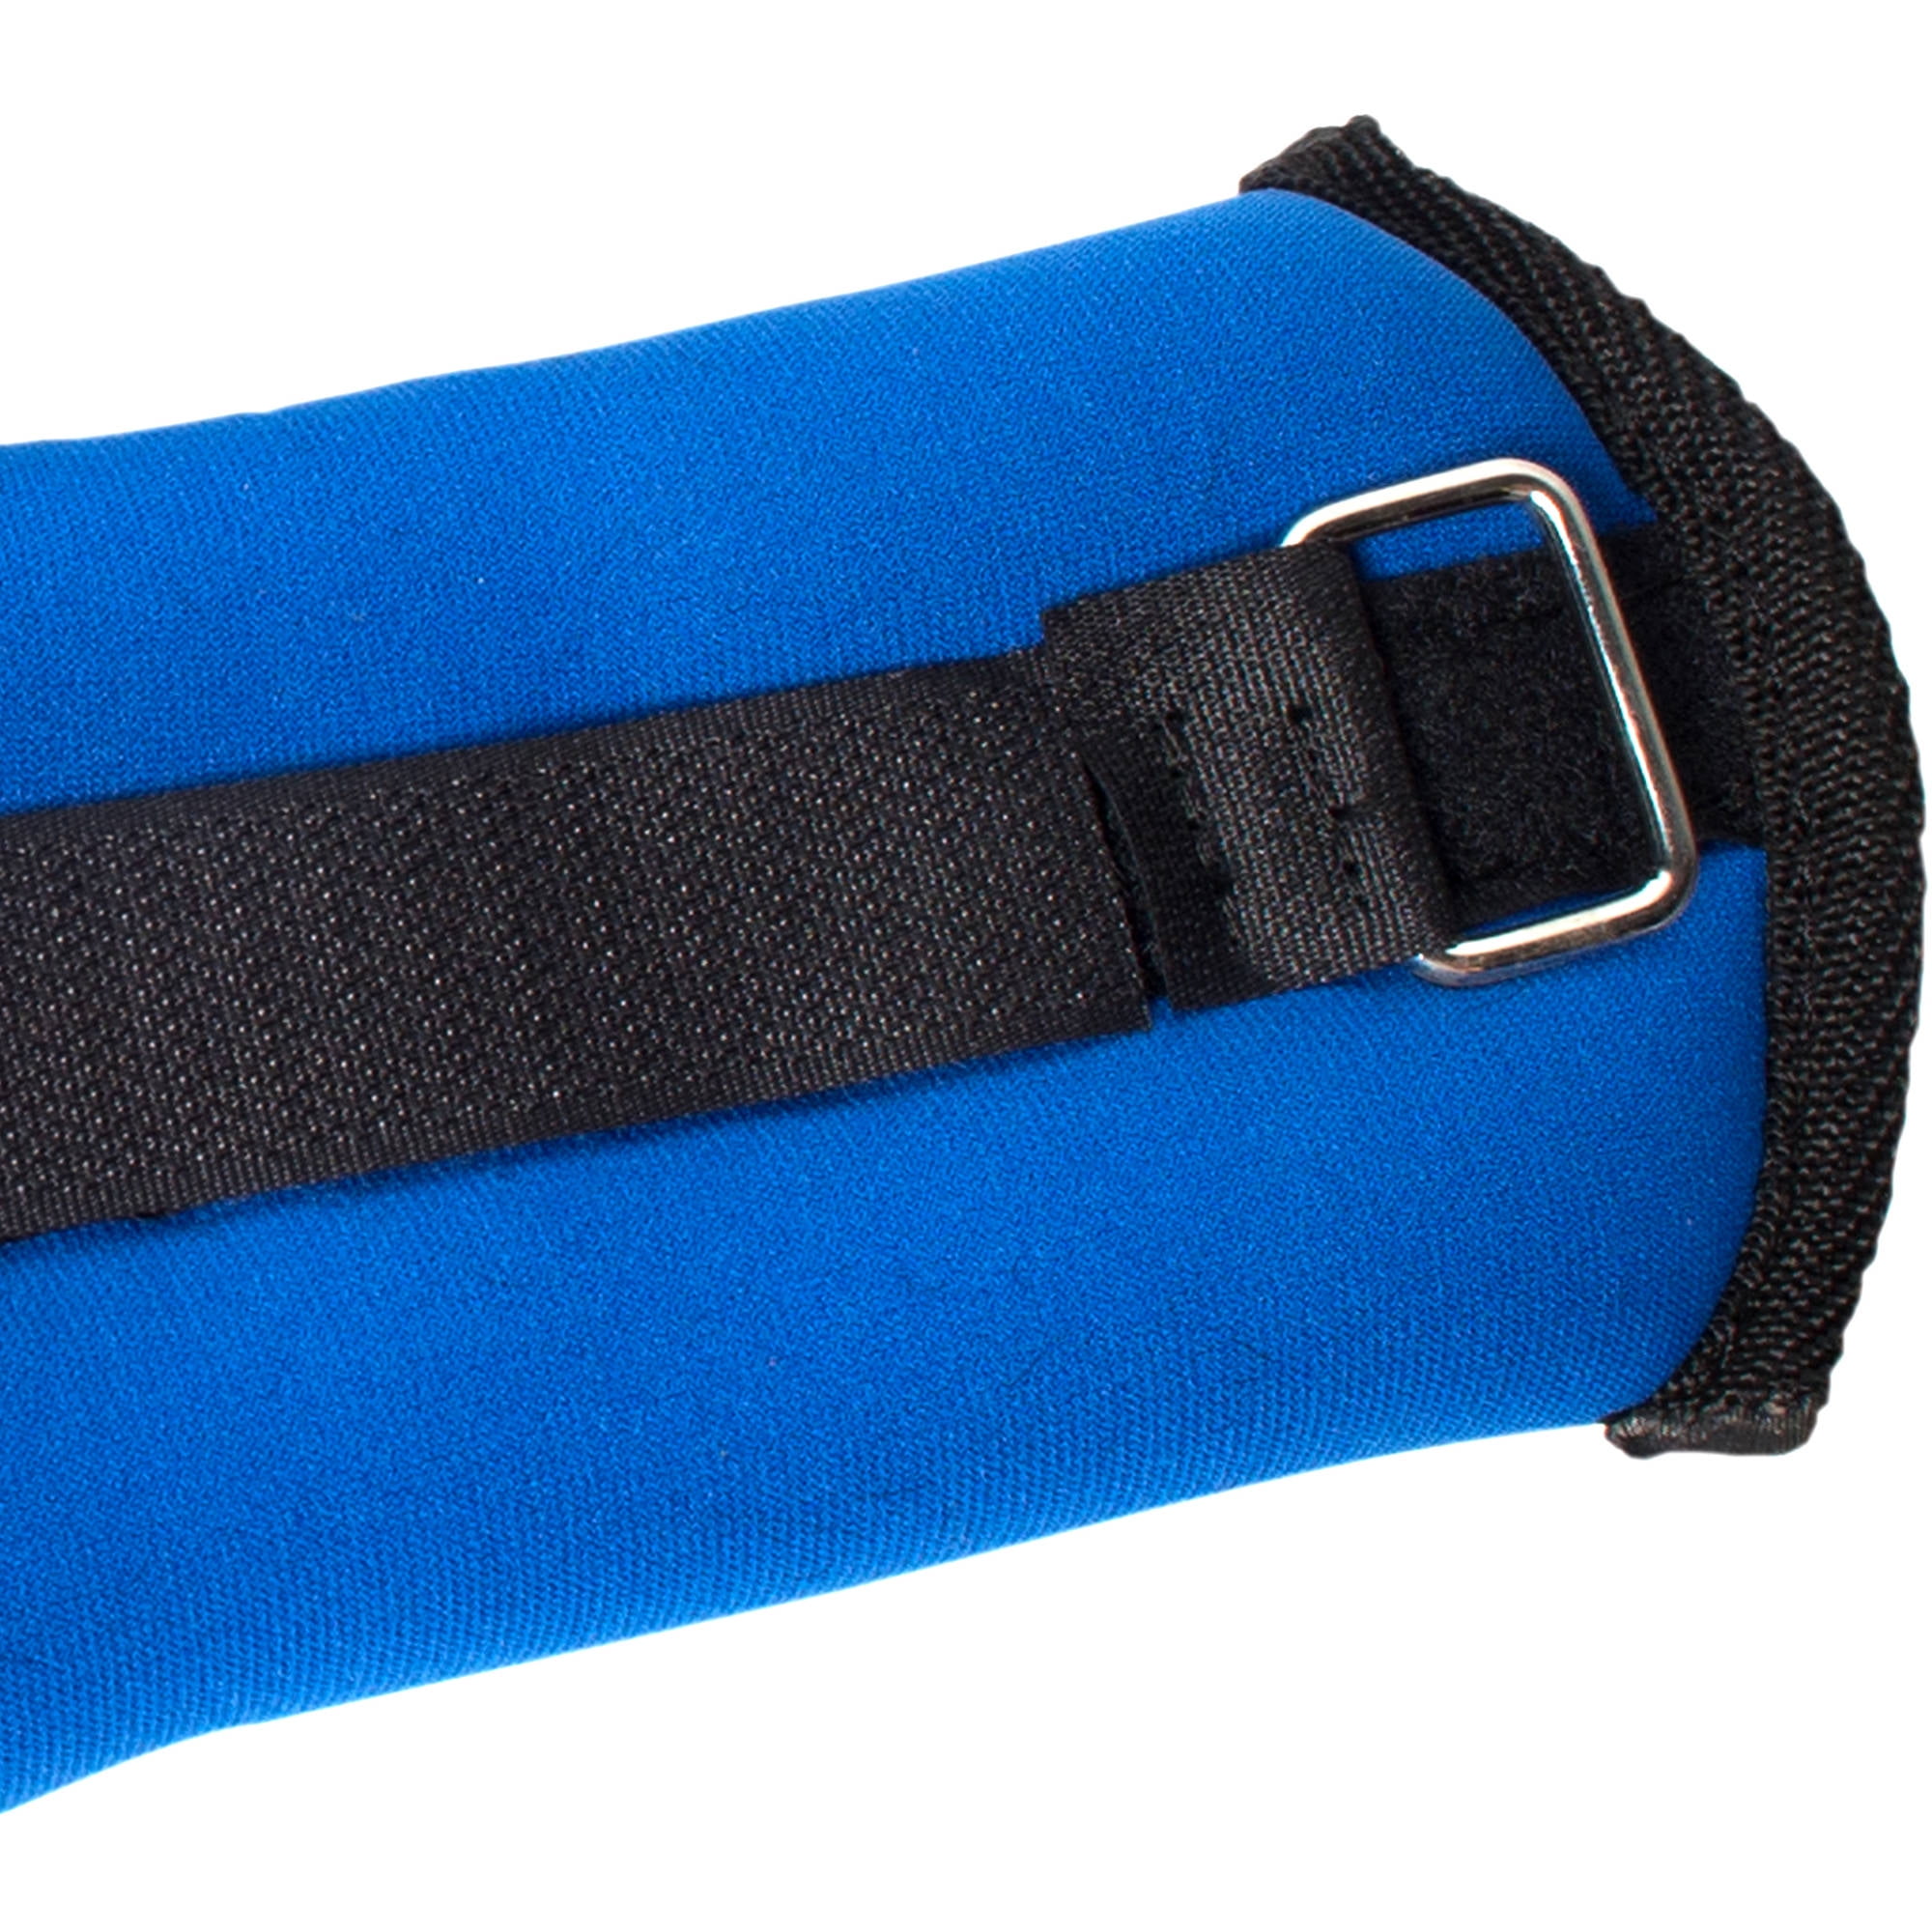 Tone Fitness Wrist/Ankle Weights Pair 1.5 Pound Pair 3-Pound Blue 